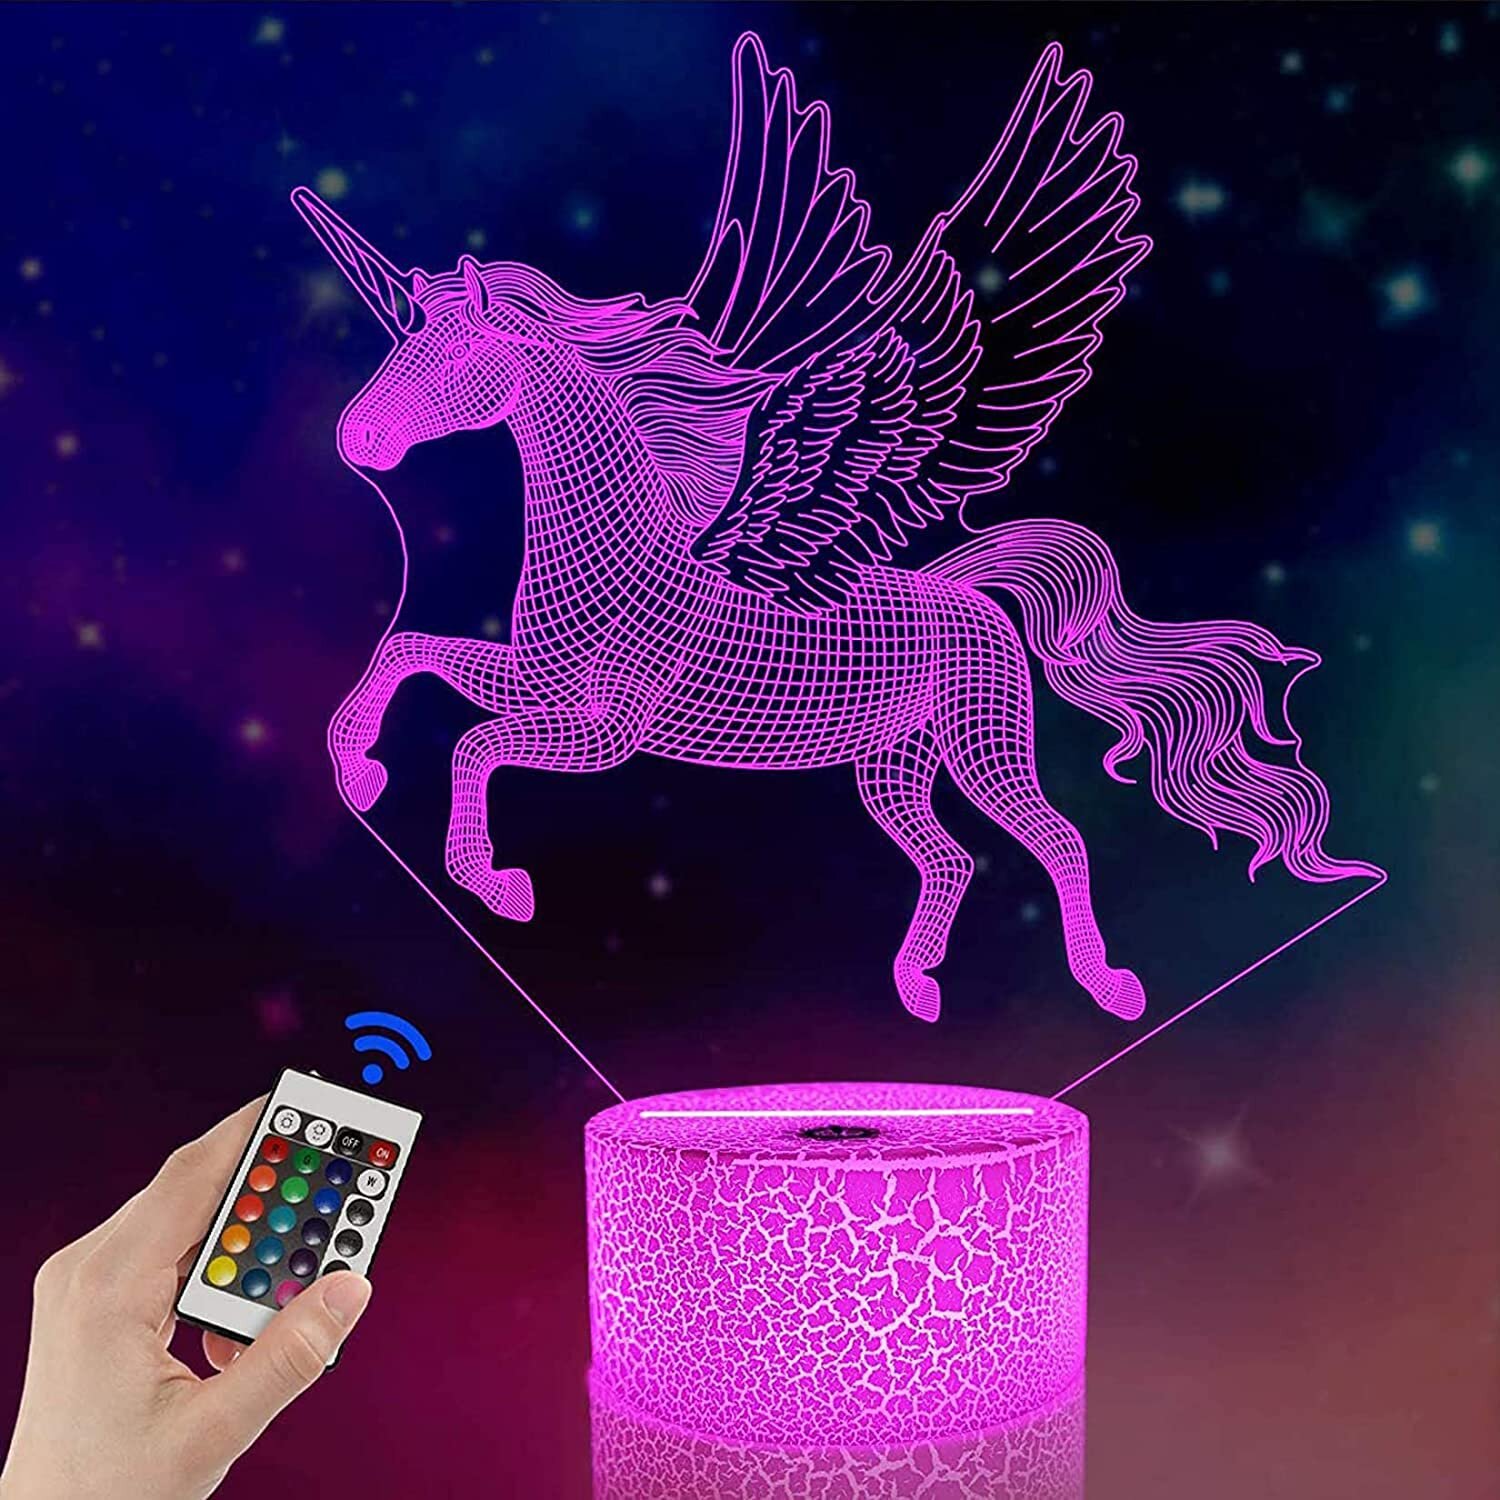 Best Gifts 3D LED Night Light 7 Color Change Decor Lamp with Remote Control for Kids